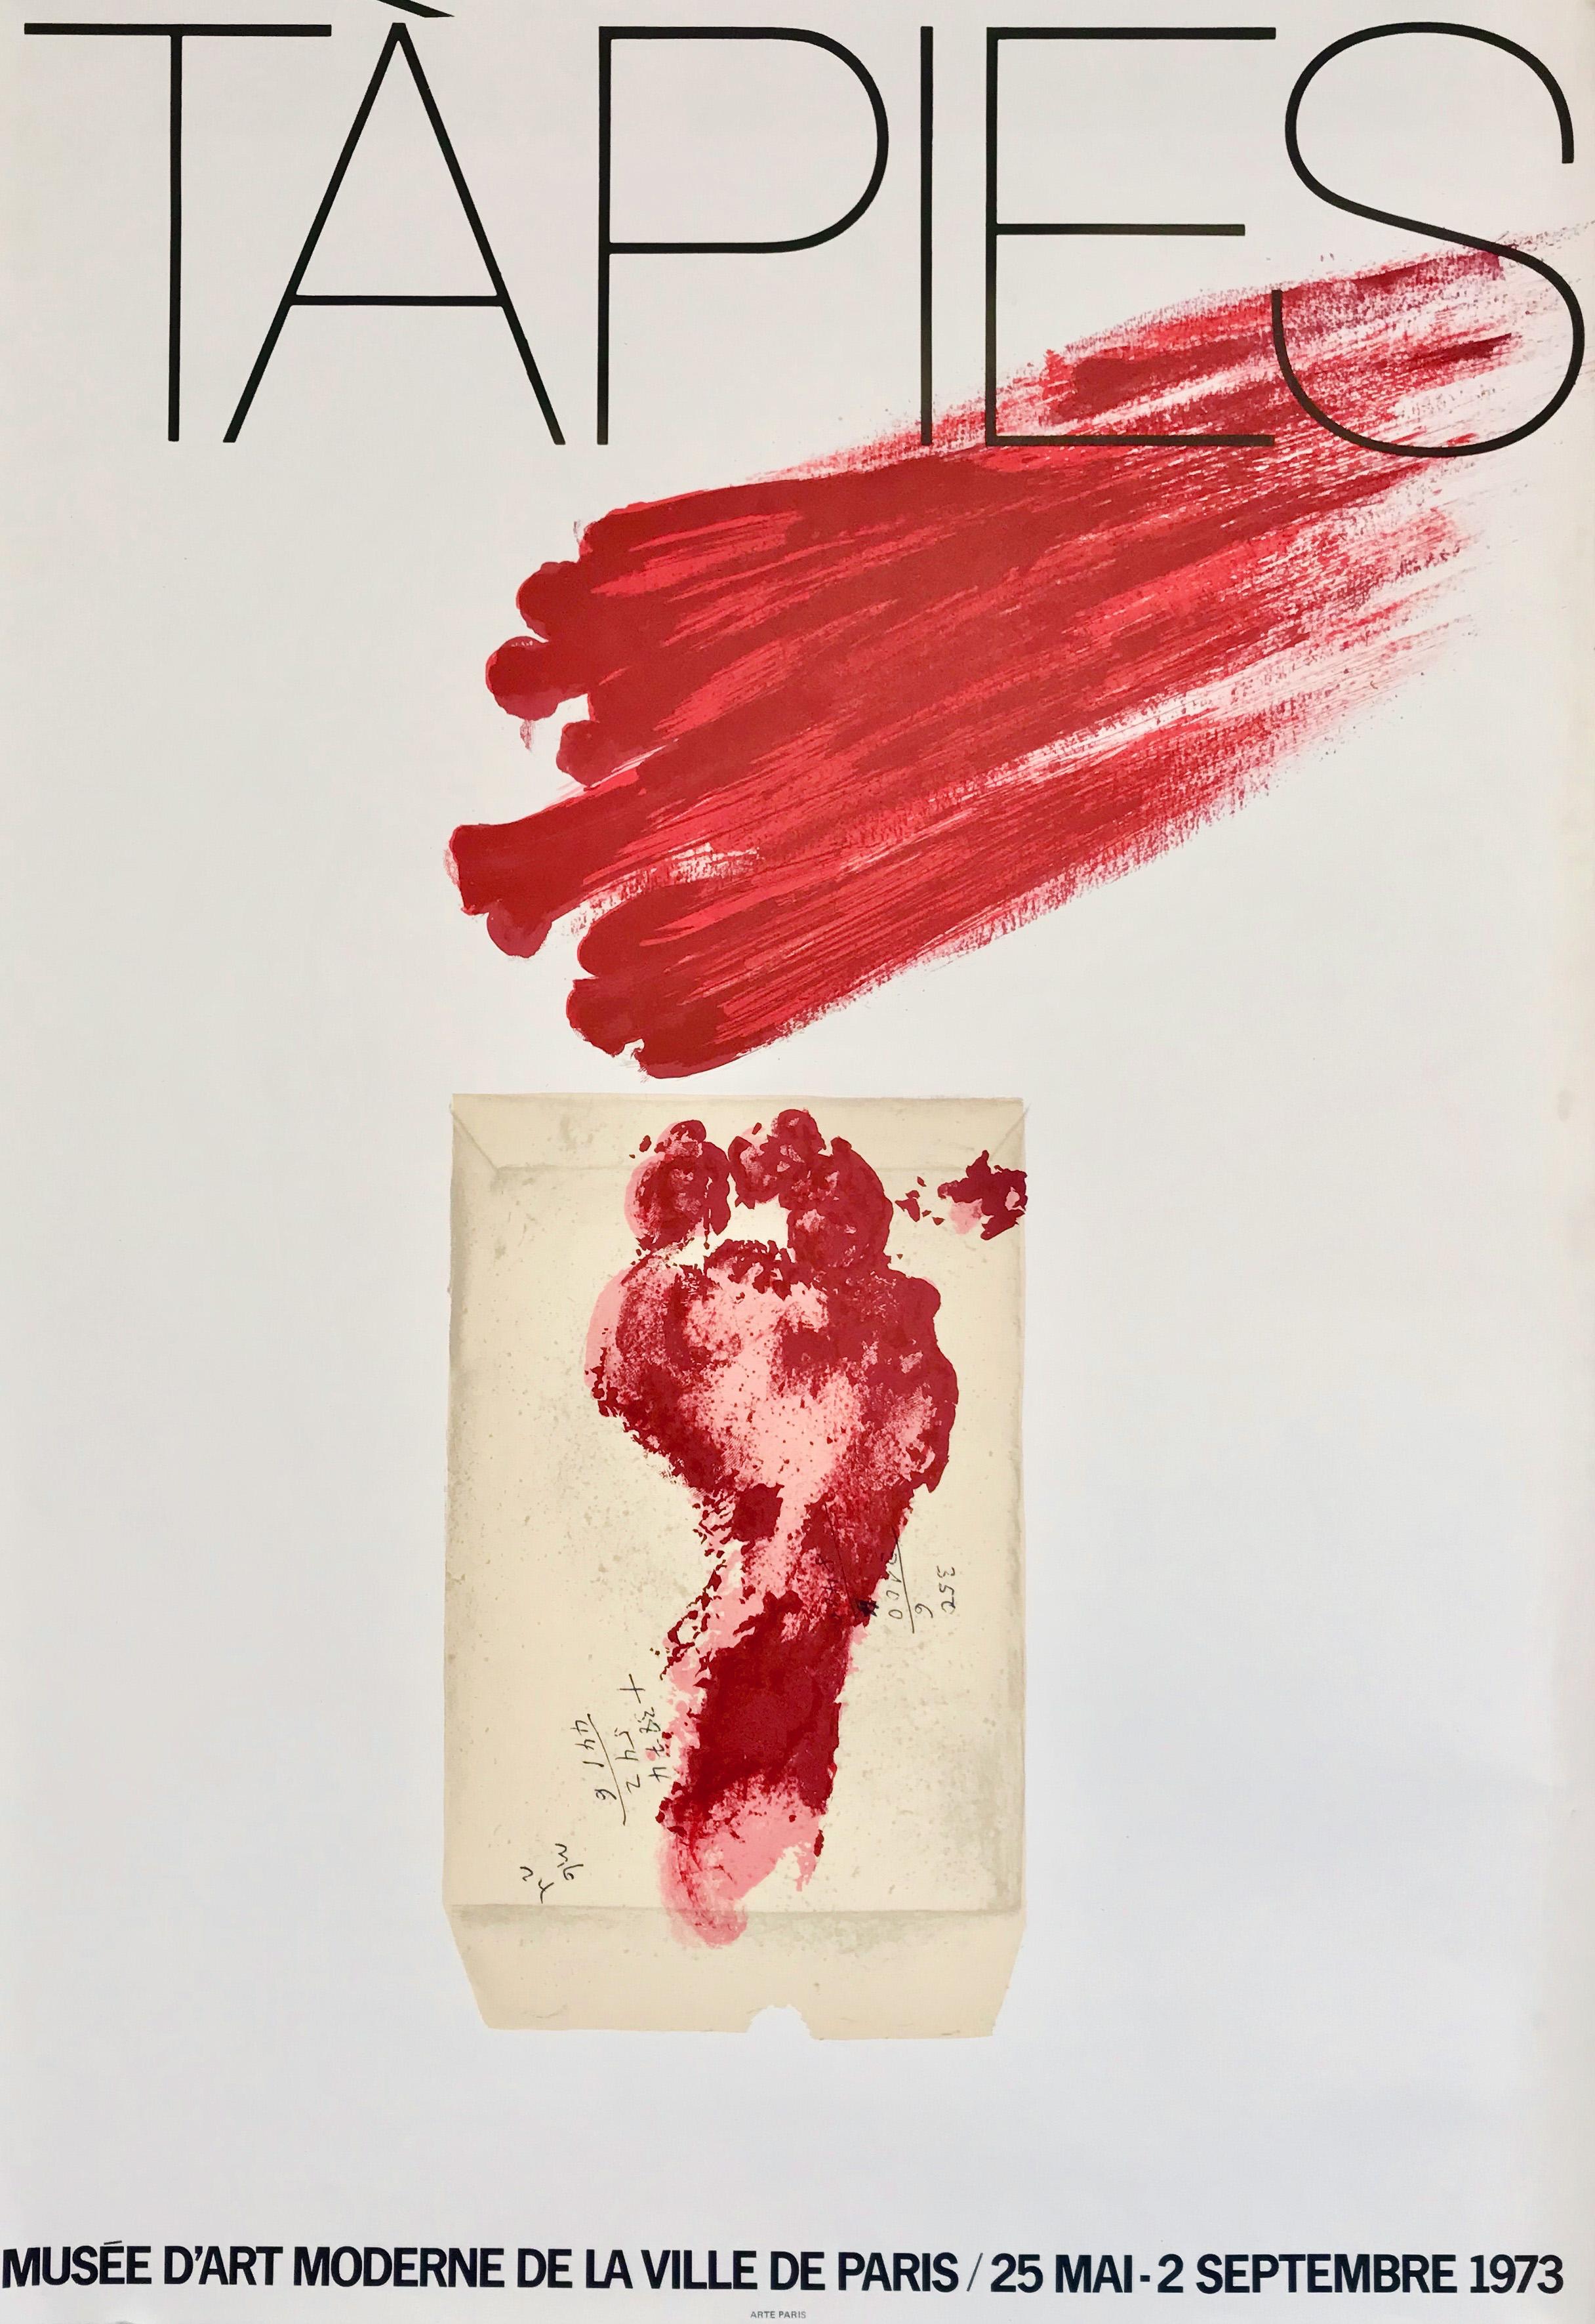 Vintage 1970s Antoni Tàpies exhibition poster:
Antoni Tàpies Musée d’Art Moderne Paris, 1973.

Offset lithograph in colors. 
19.5 x 28.5 inches (50 x 72 cm). 
Good overall condition.
1st edition, 1st printing 1973. 
Unsigned from an edition of